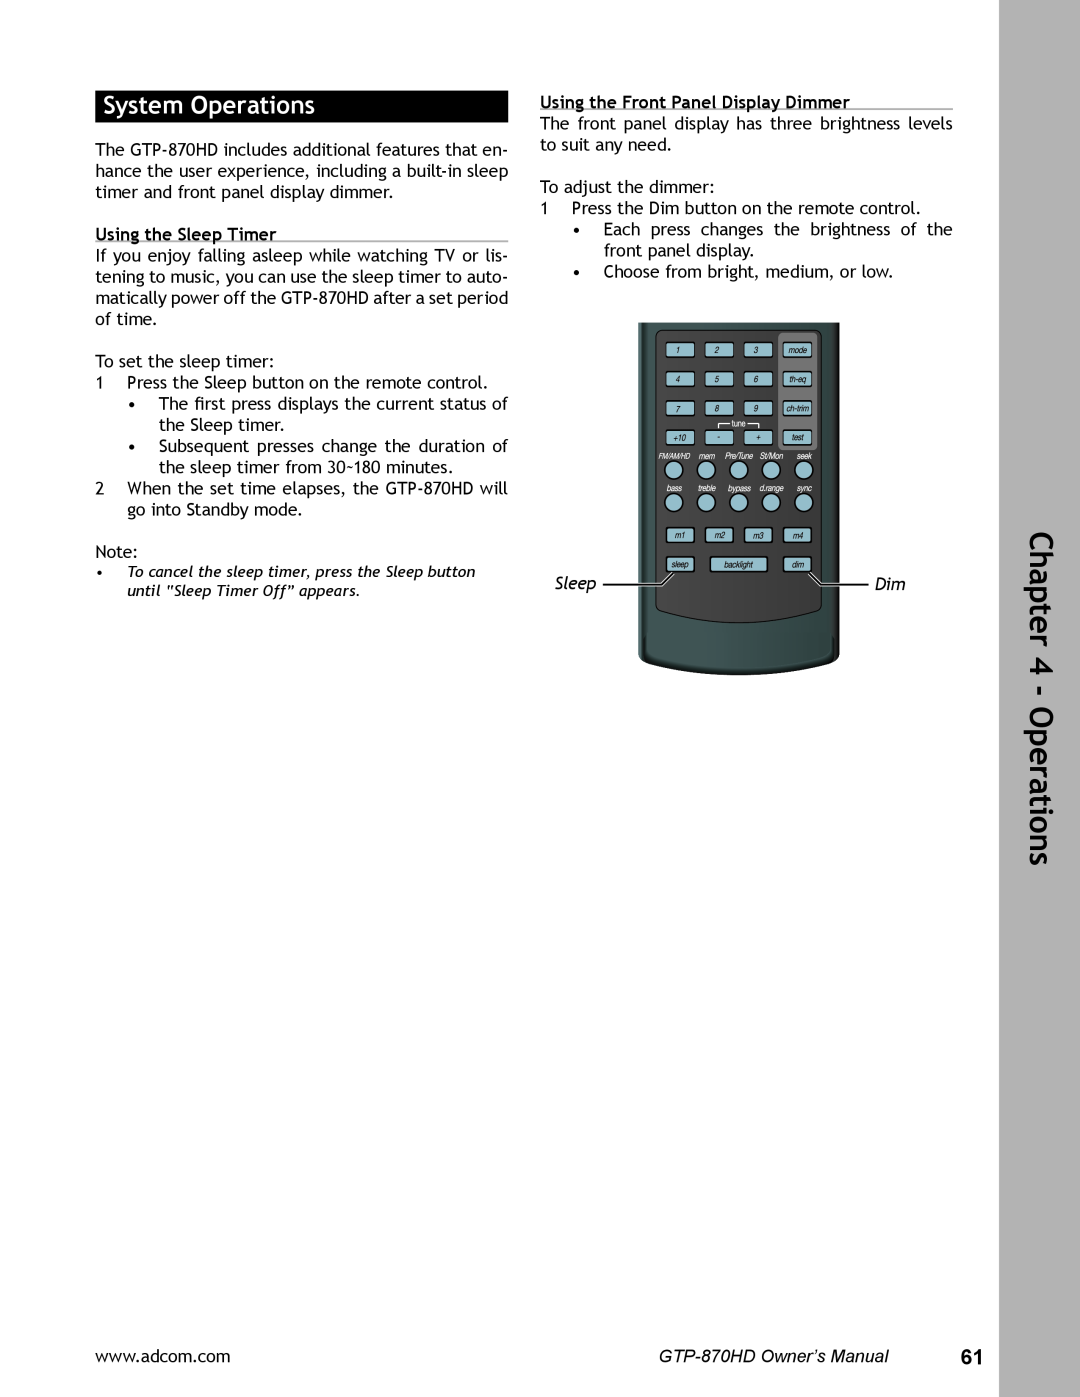 Adcom GTP-870HD user manual System Operations, Using the Sleep Timer, Using the Front Panel Display Dimmer, SleepDim 